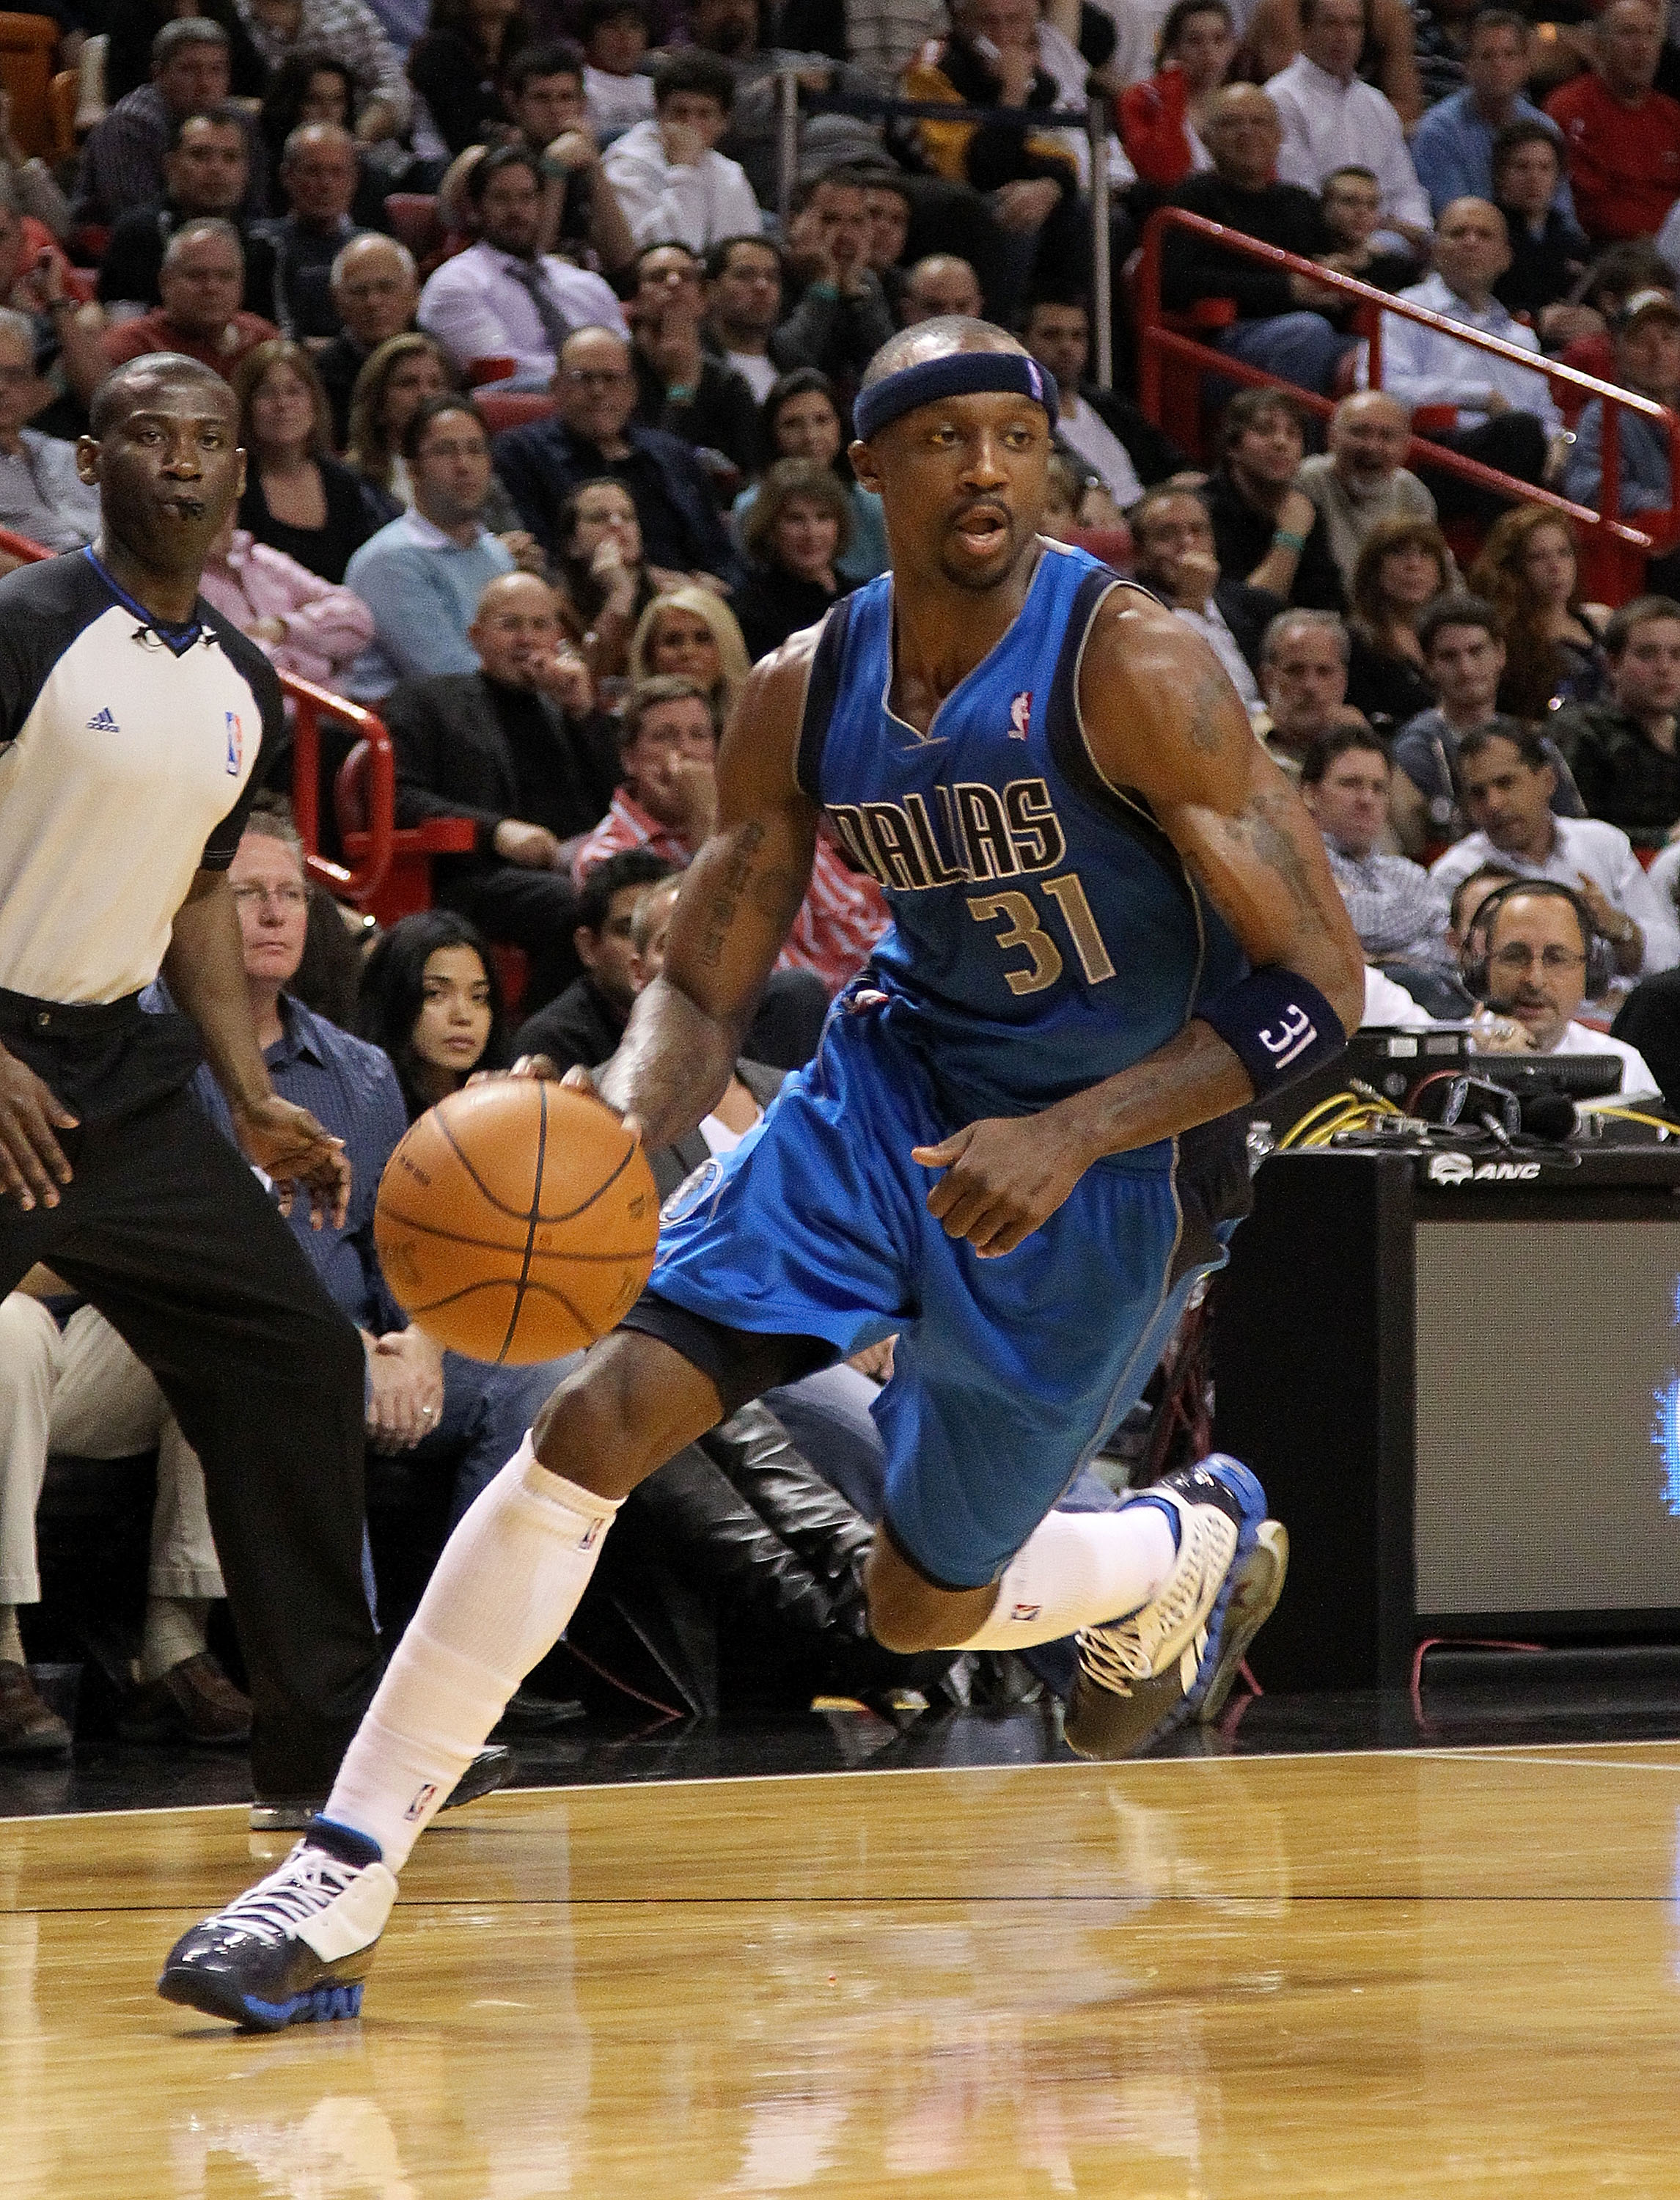 MIAMI, FL - DECEMBER 20:  Jason Terry #31 of the Dallas Mavericks dribbles during a game against the Miami Heat at American Airlines Arena on December 20, 2010 in Miami, Florida. NOTE TO USER: User expressly acknowledges and agrees that, by downloading an